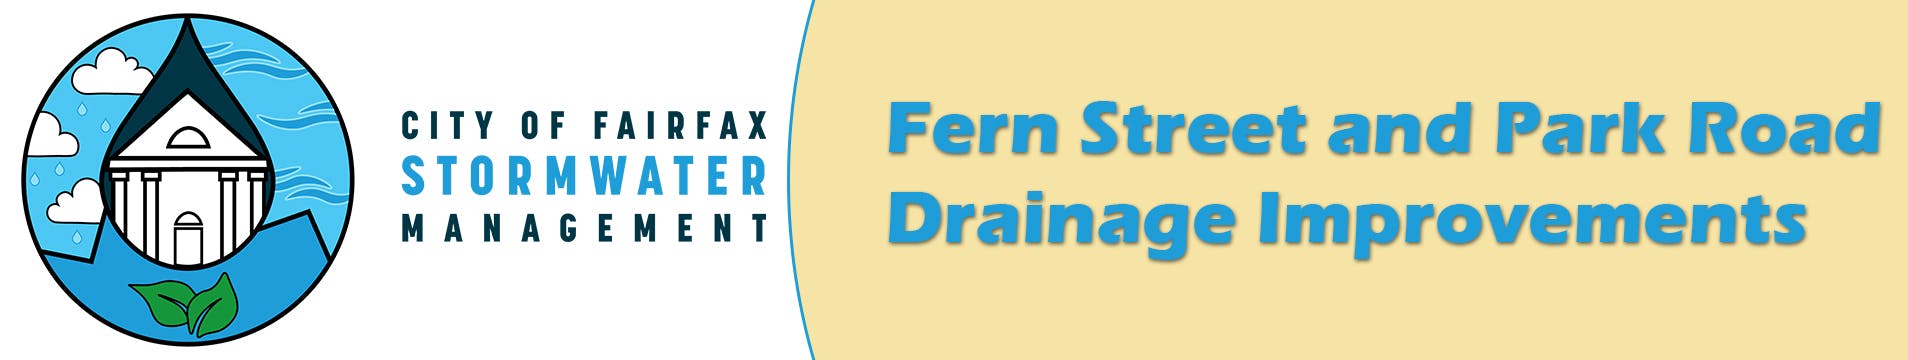 Fern Street and Park Road Drainage Improvements